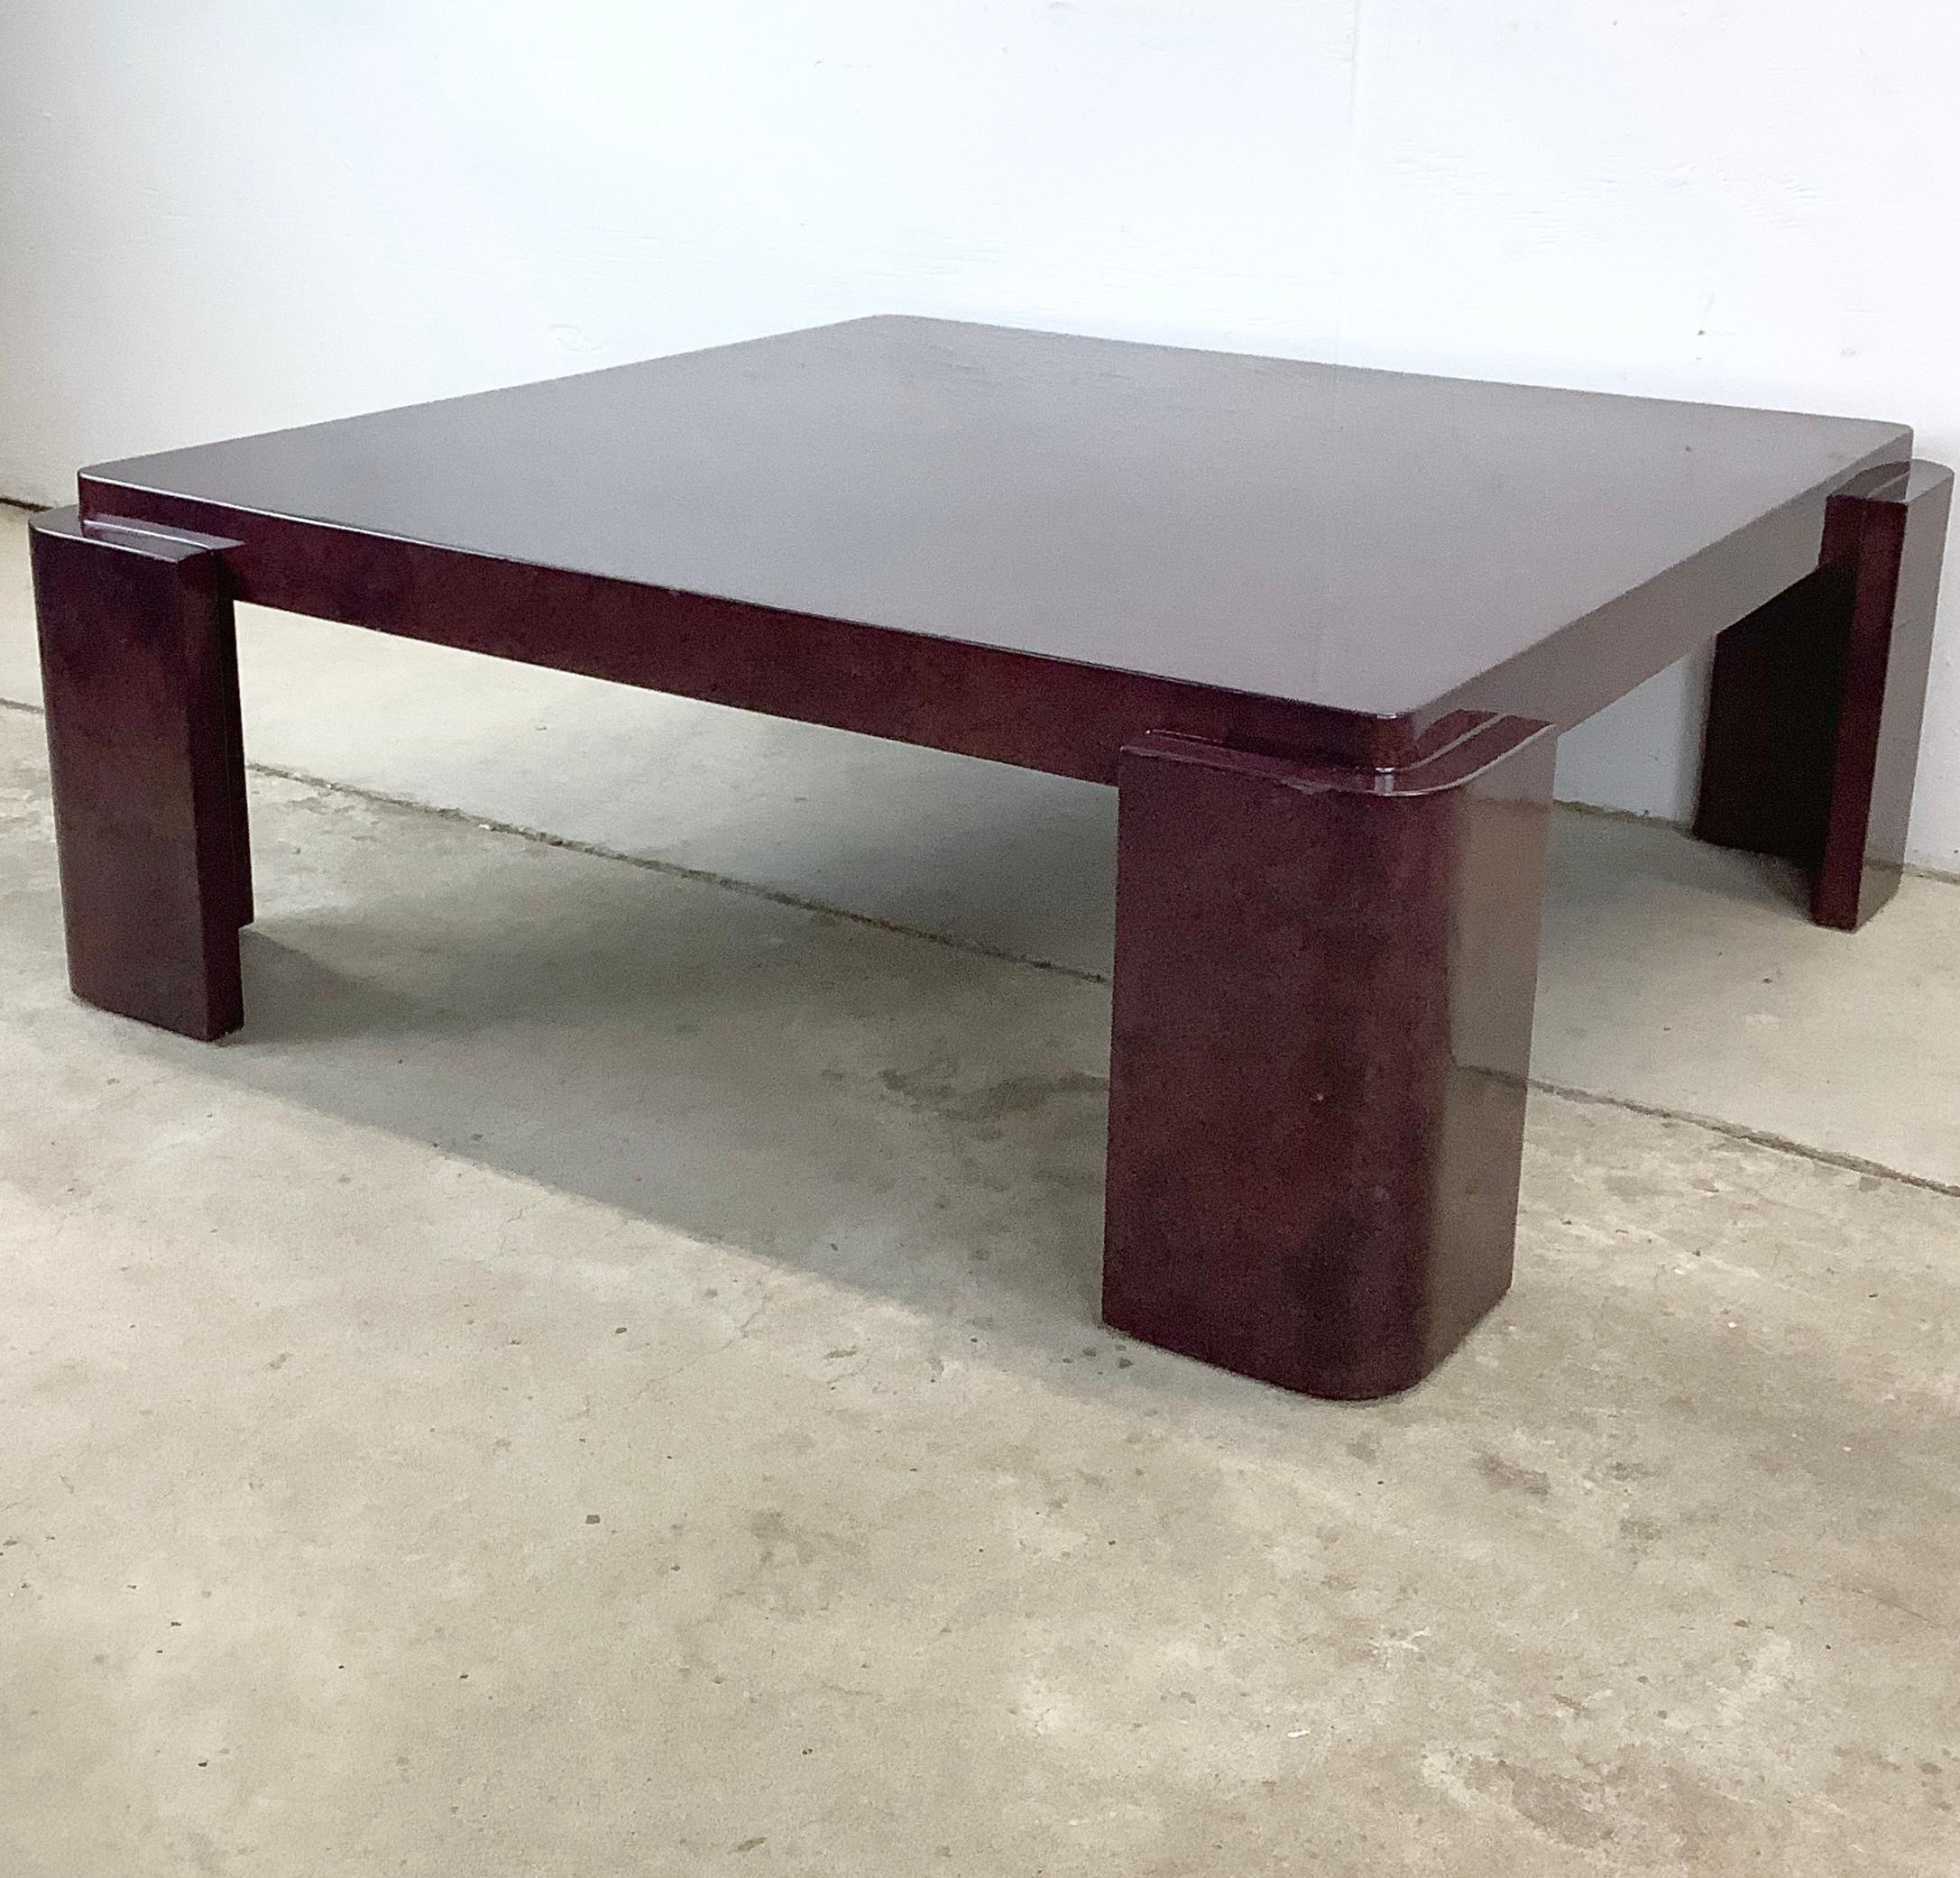 This showstopping oversized square coffee table is a true gem in the world of vintage modern furniture. Adorned with a luxurious purple lacquer finish, is a perfect fit for spacious interiors in need of a center table that brings with it the